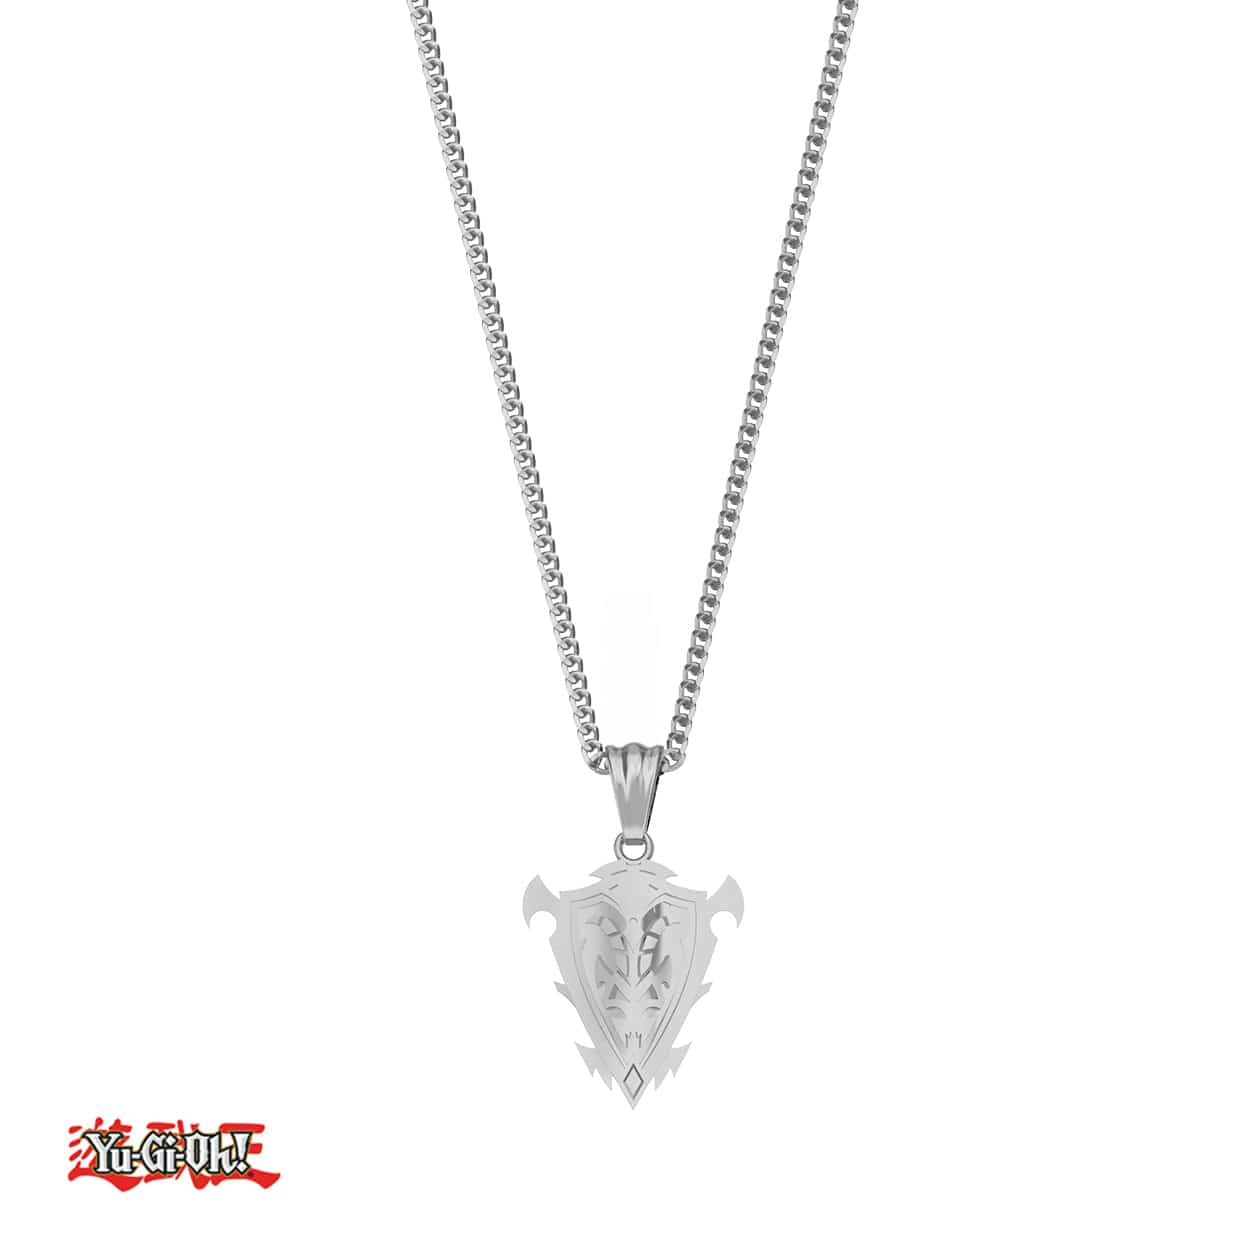 Yu-Gi-Oh!™ Black Luster Shield Necklace